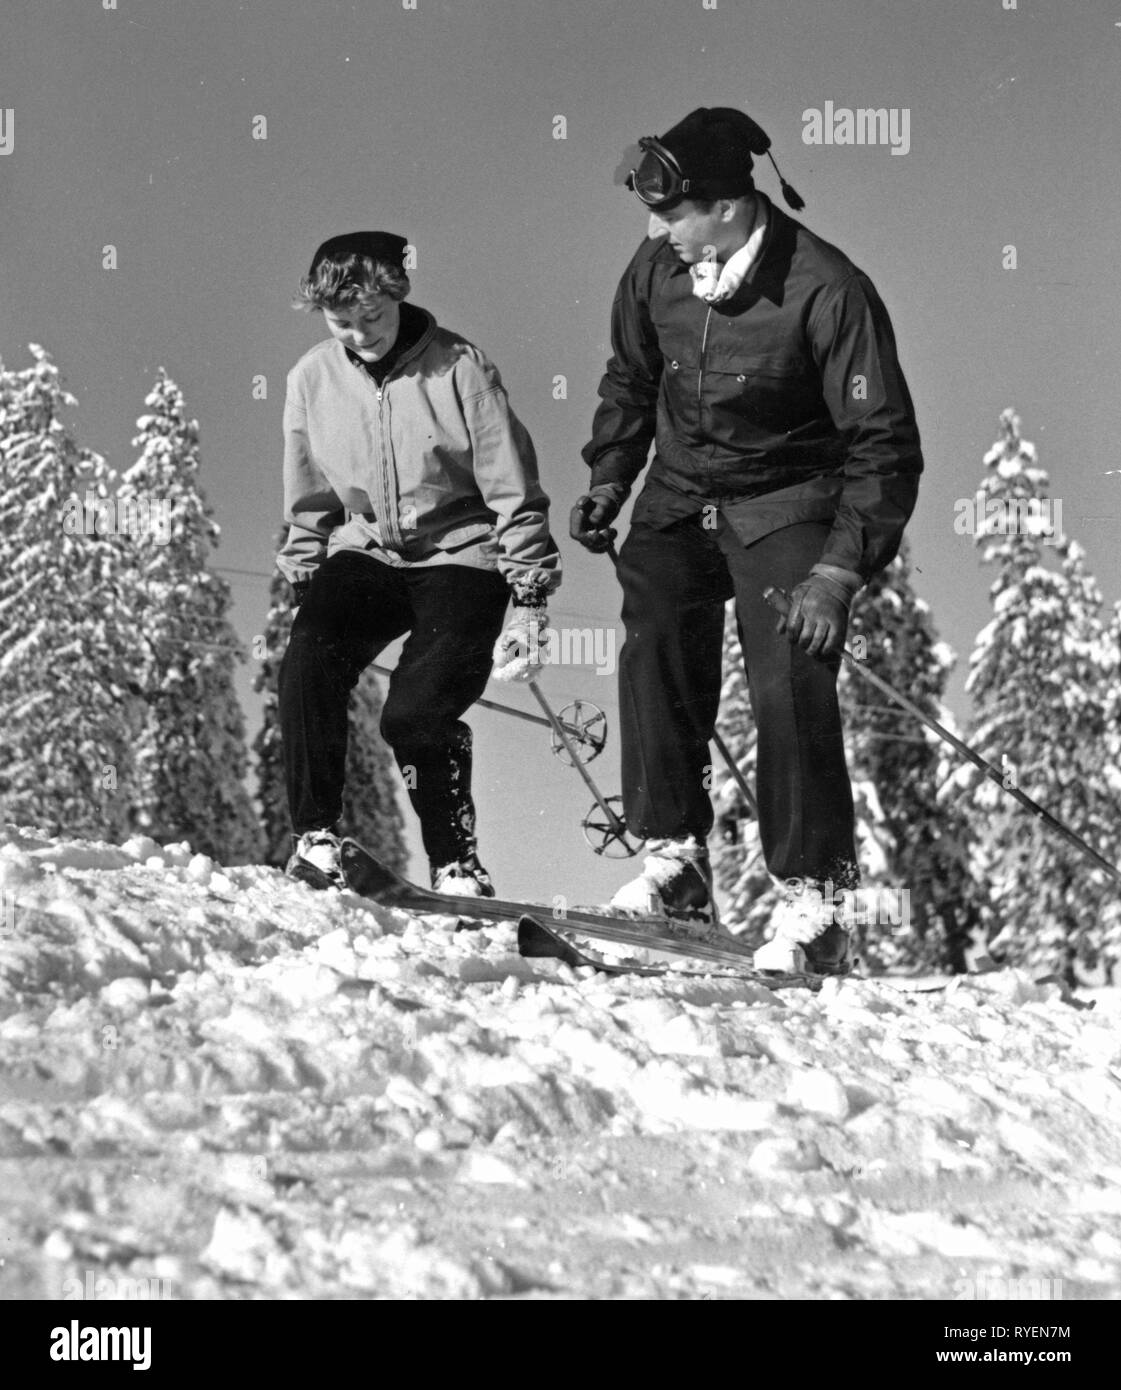 Sport, Wintersport, Skifahren, Skikurs, Knie übung, 1950er Jahre, Additional-Rights - Clearance-Info - Not-Available Stockfoto